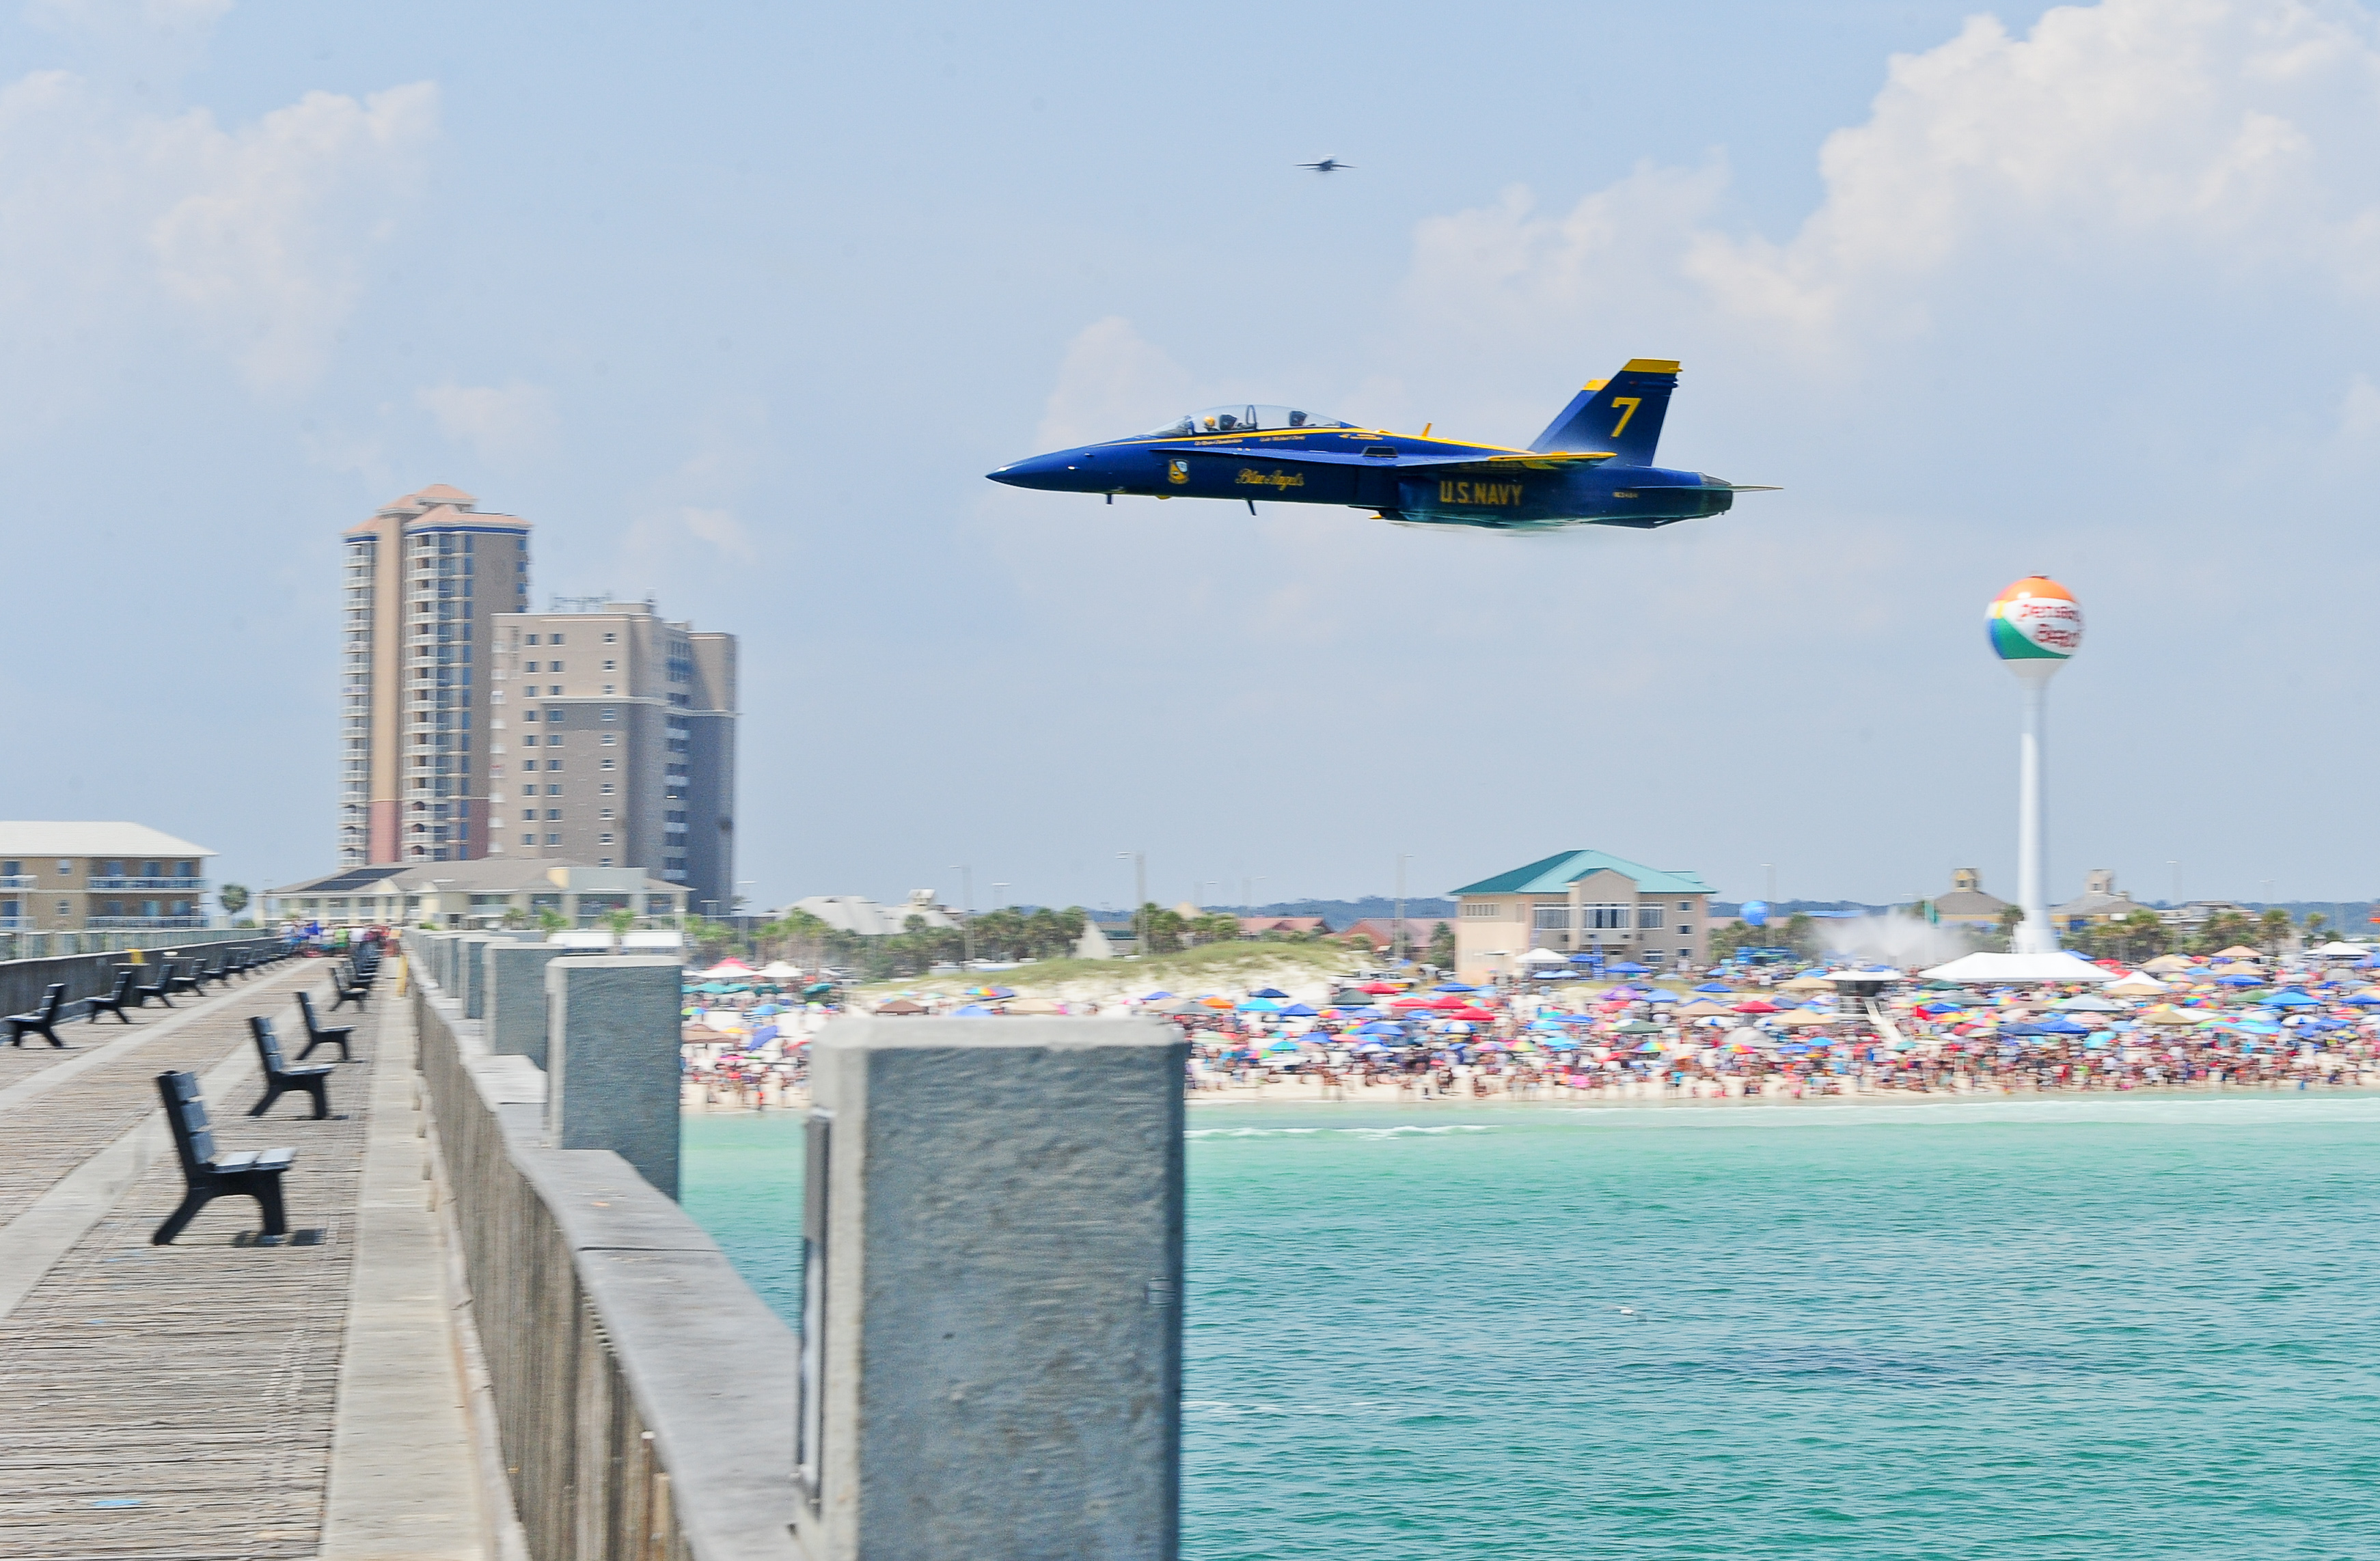 A Blue Angels solo pilot makes a high speed pass over the Pensacola Beach Gulf Pier, wowing thousands of spectators, during the Pensacola Beach Air Show.